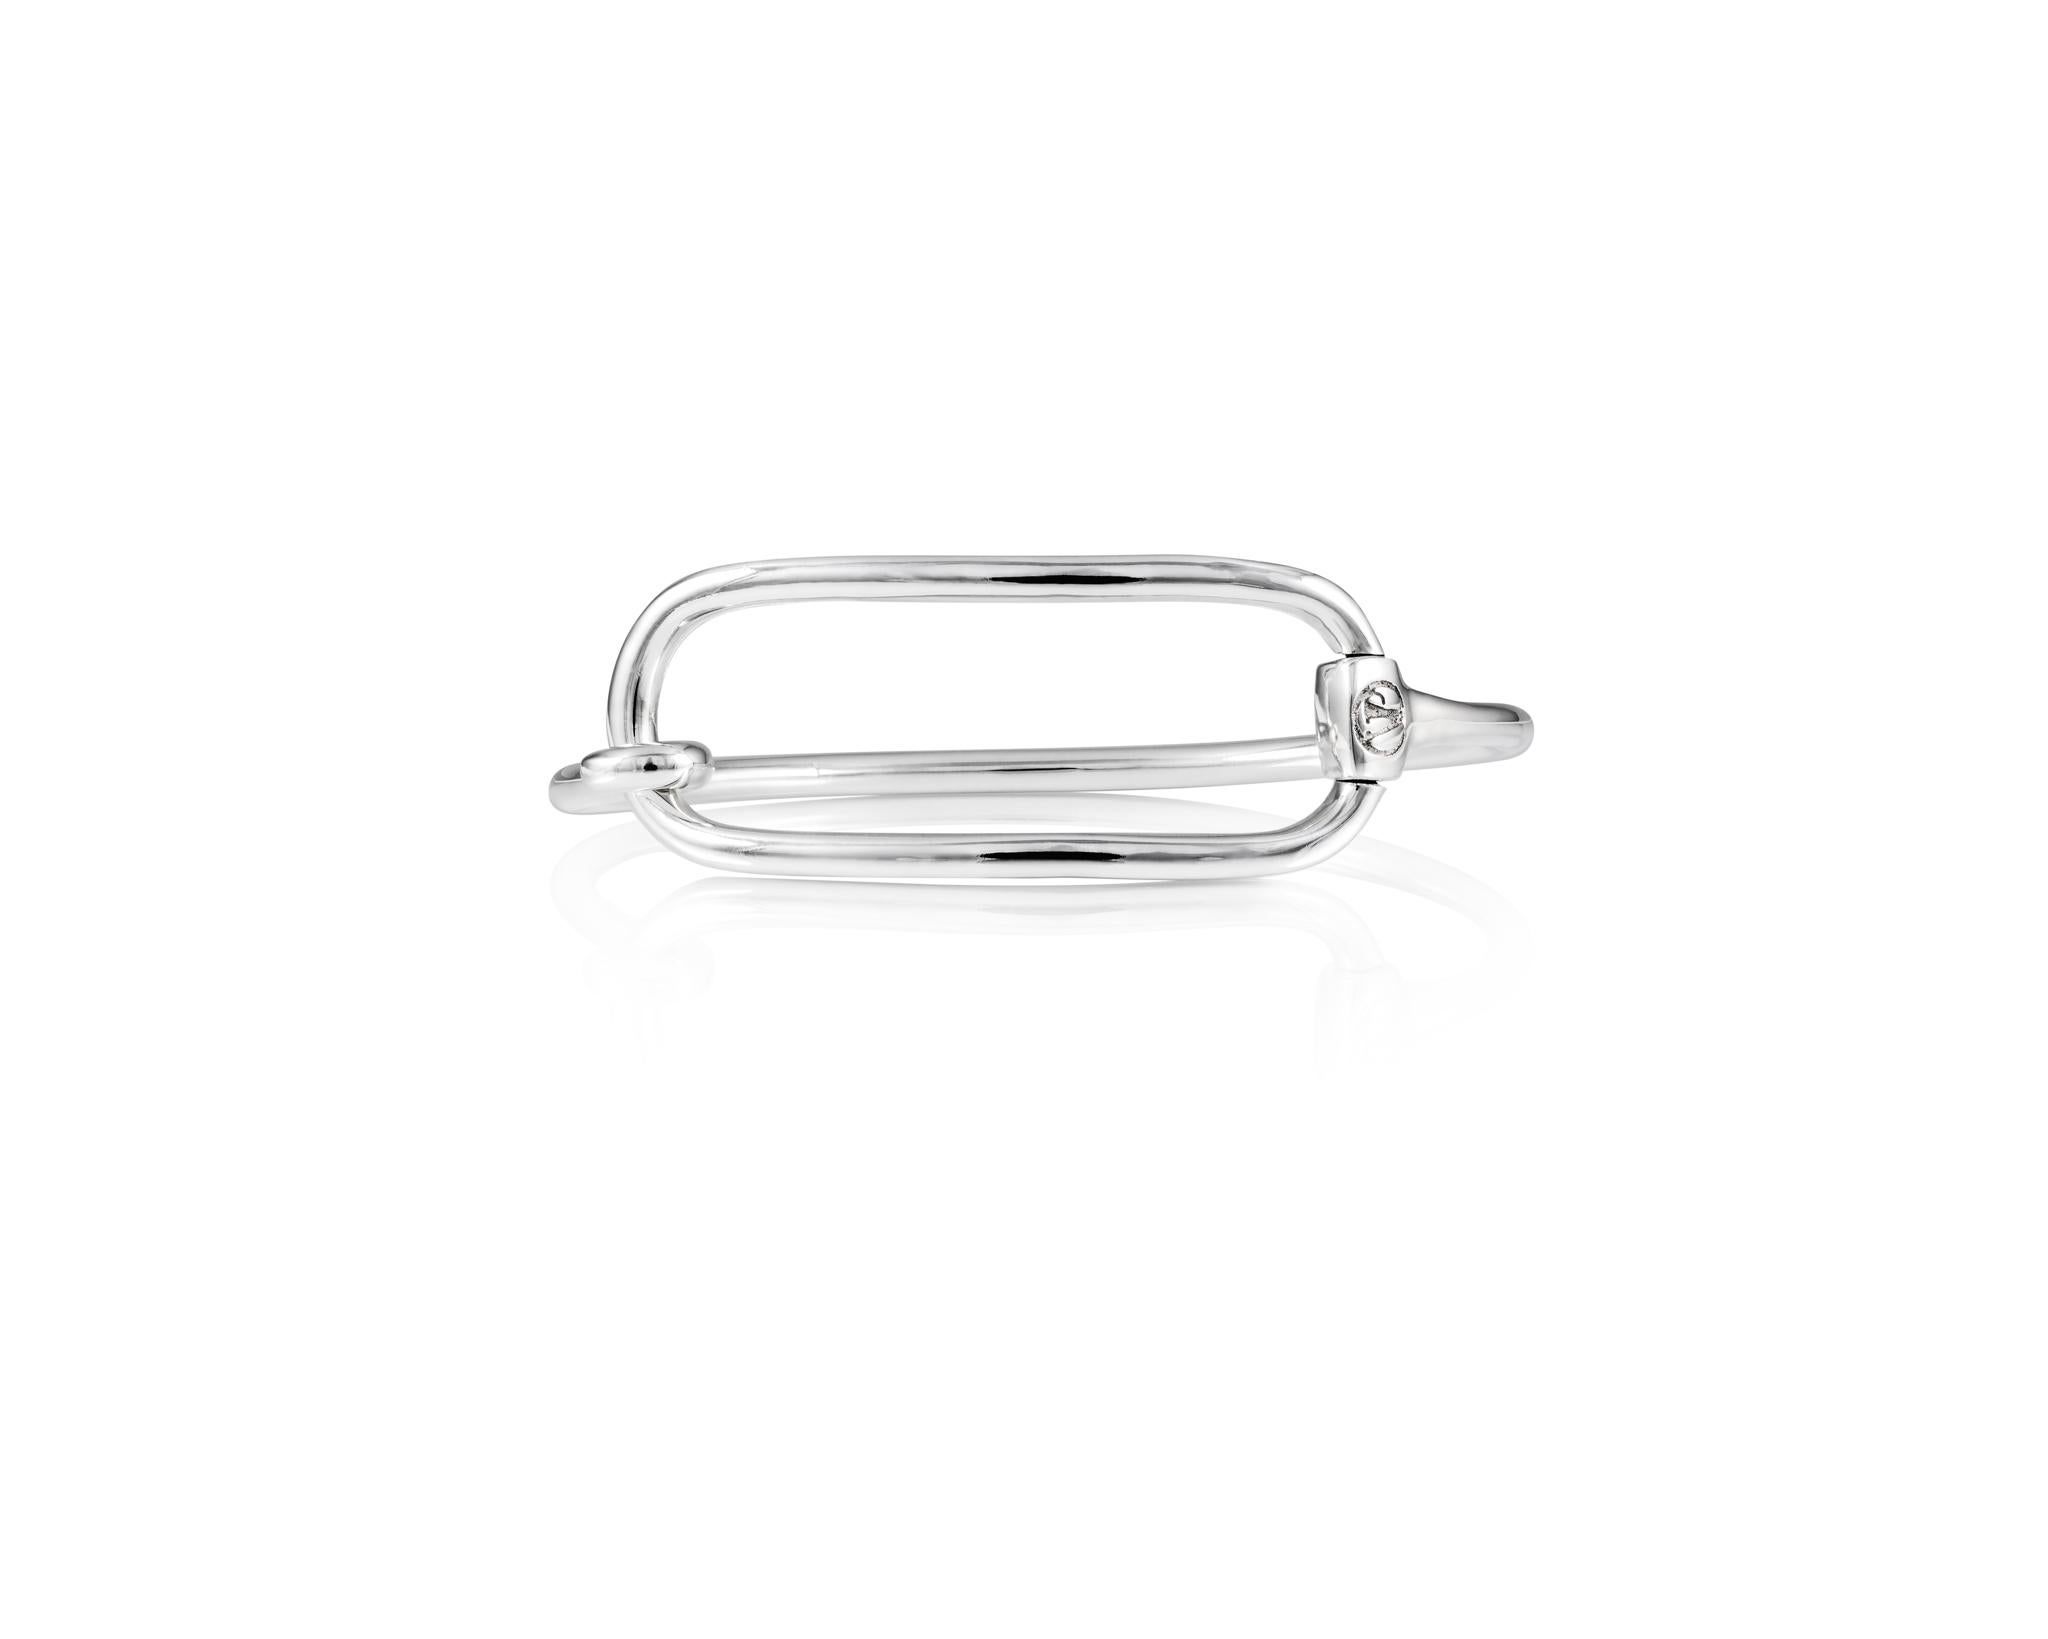 Part of the Vincent Peach Equestrian Collection, the chic Rectangle Snaffle Bit Bangle is solid Sterling Silver and is 7